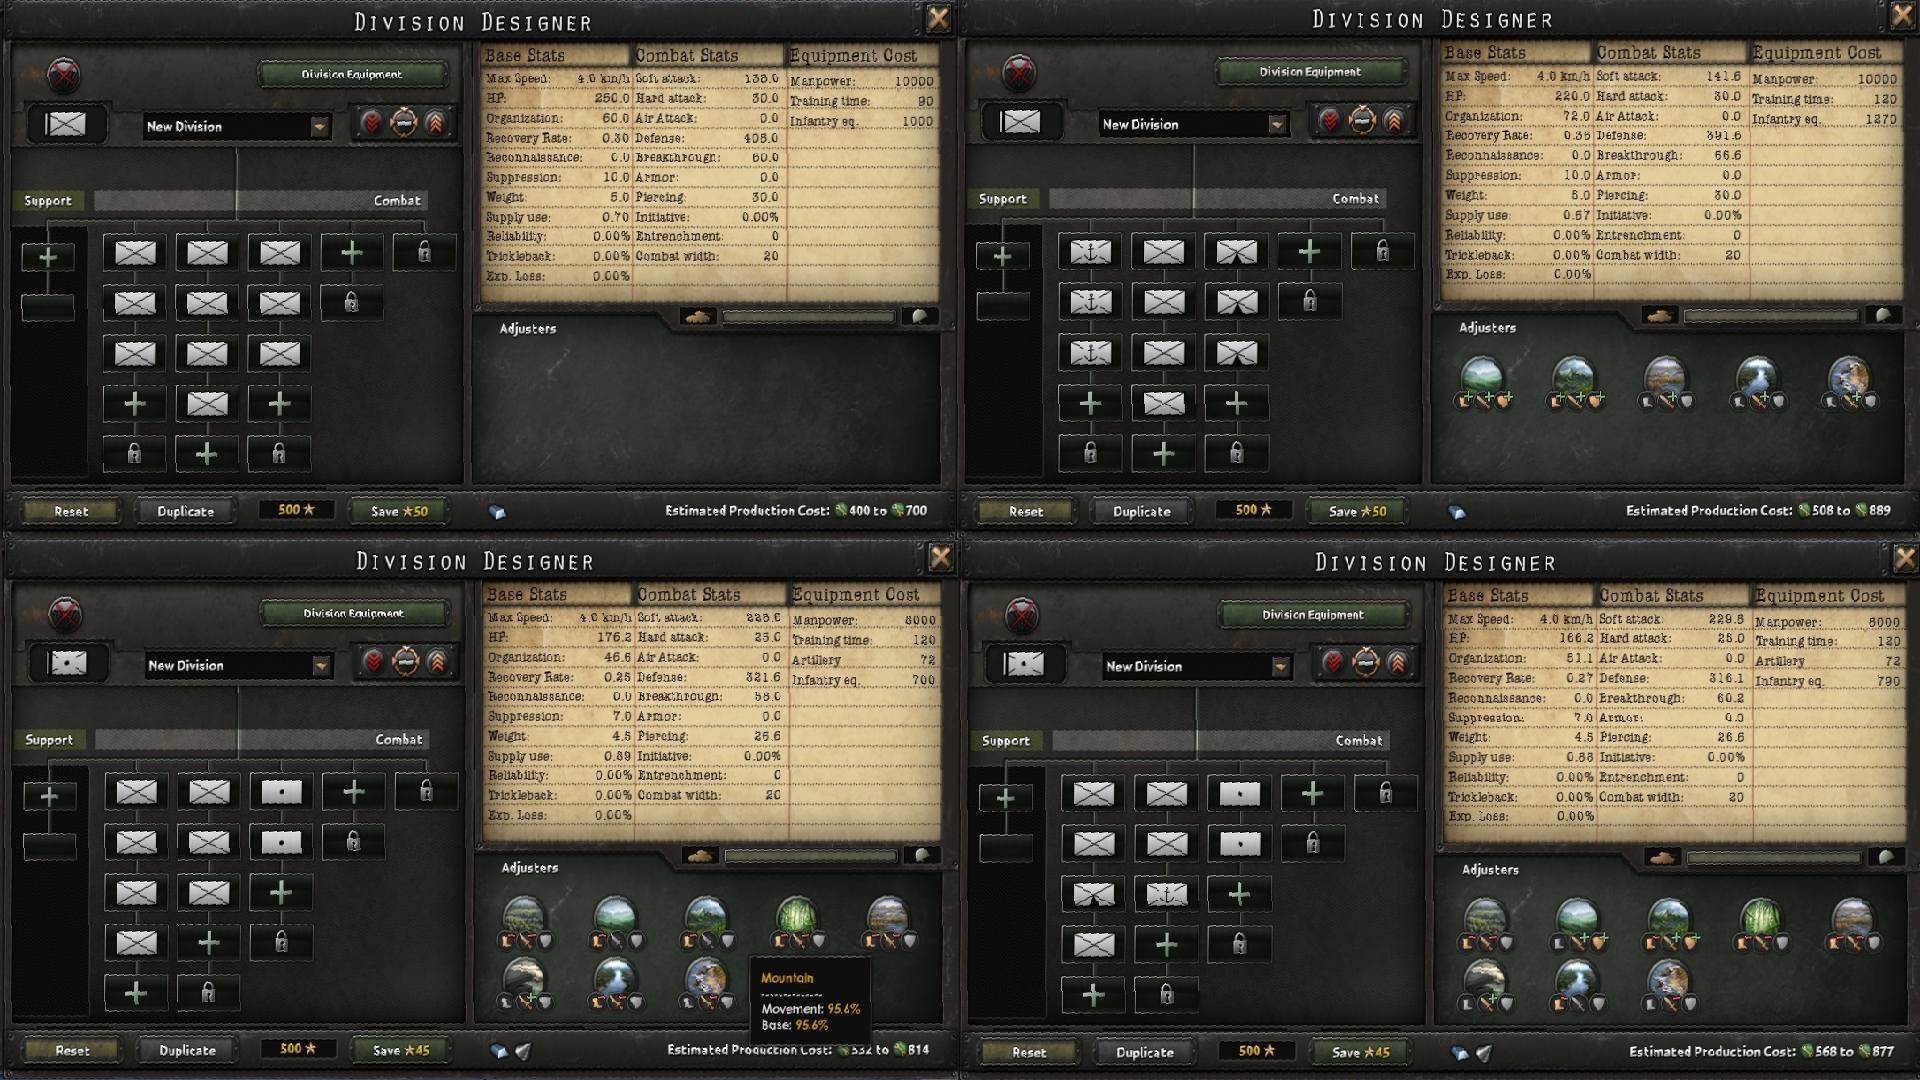 hearts of iron 4 best division templates